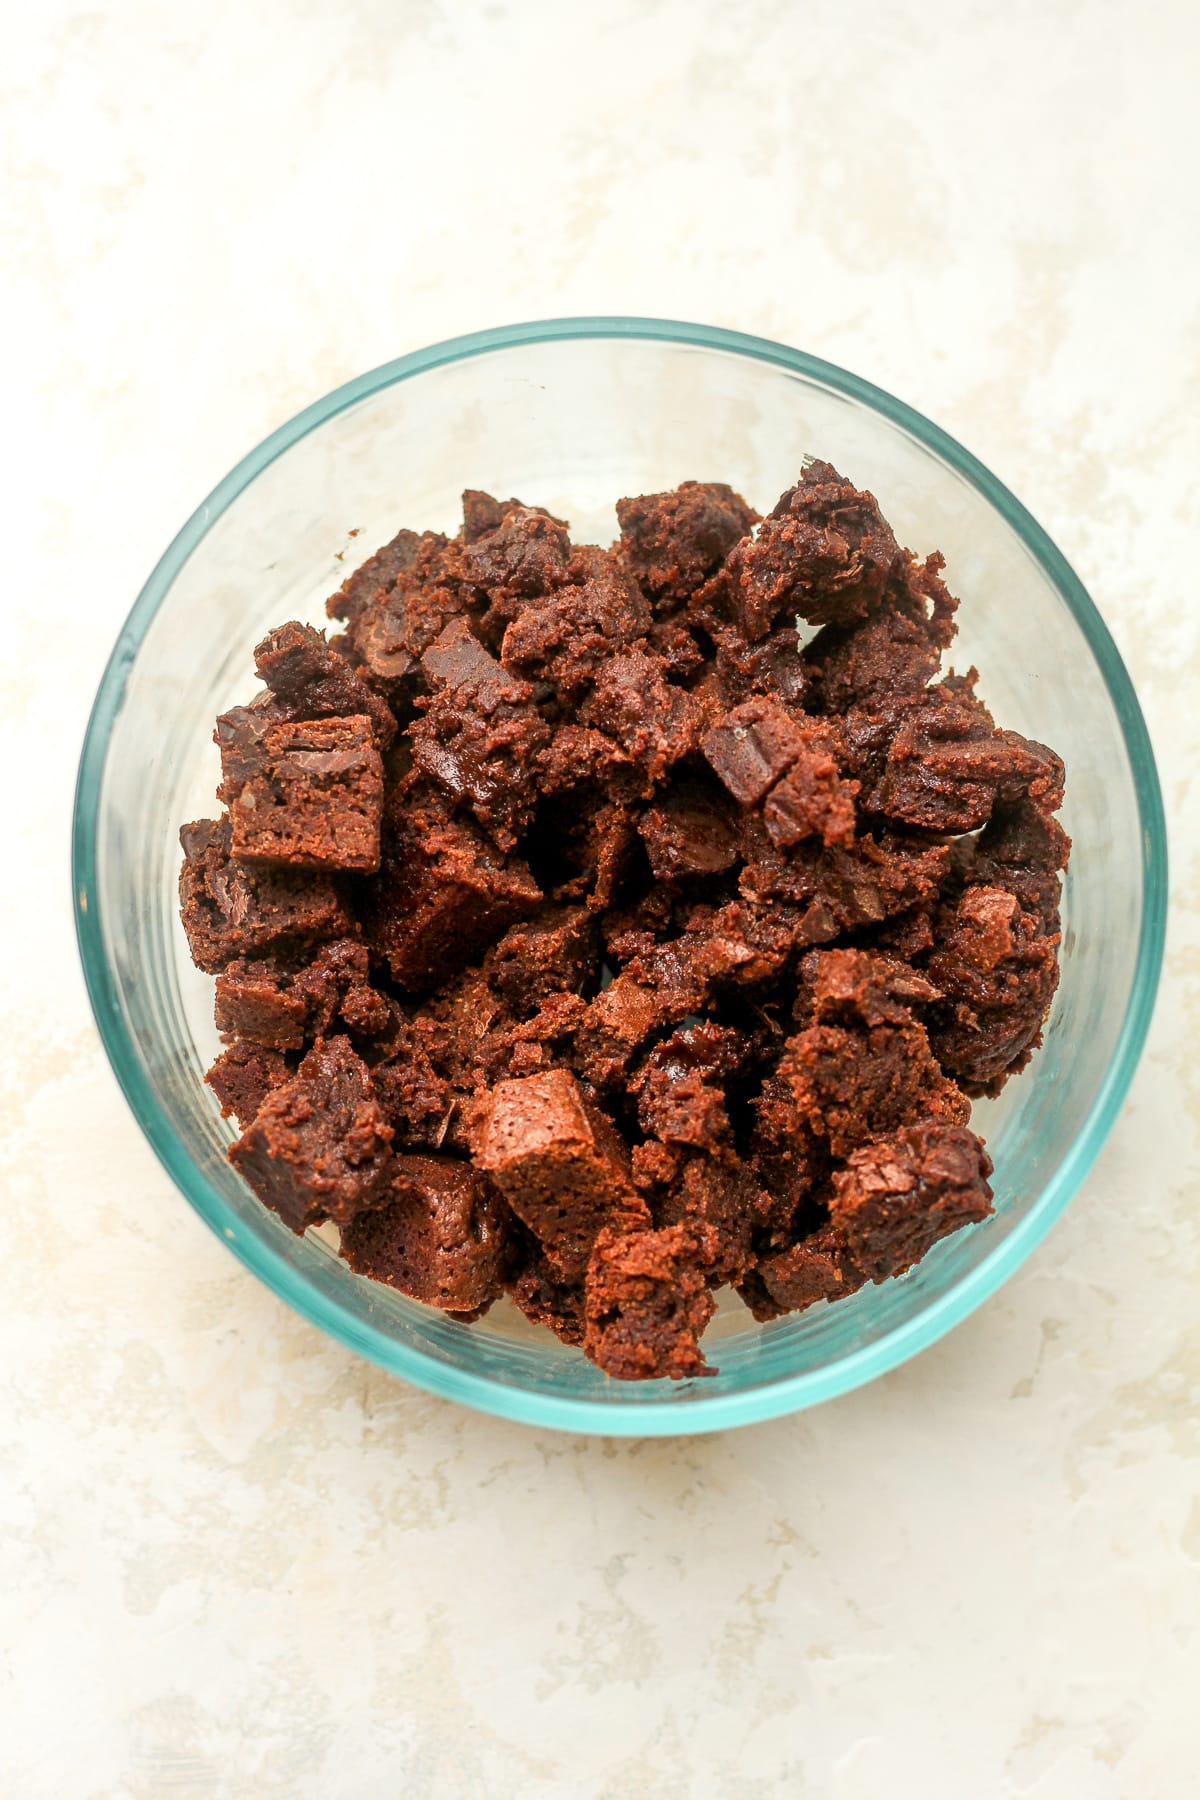 A bowl of the brownie bites.